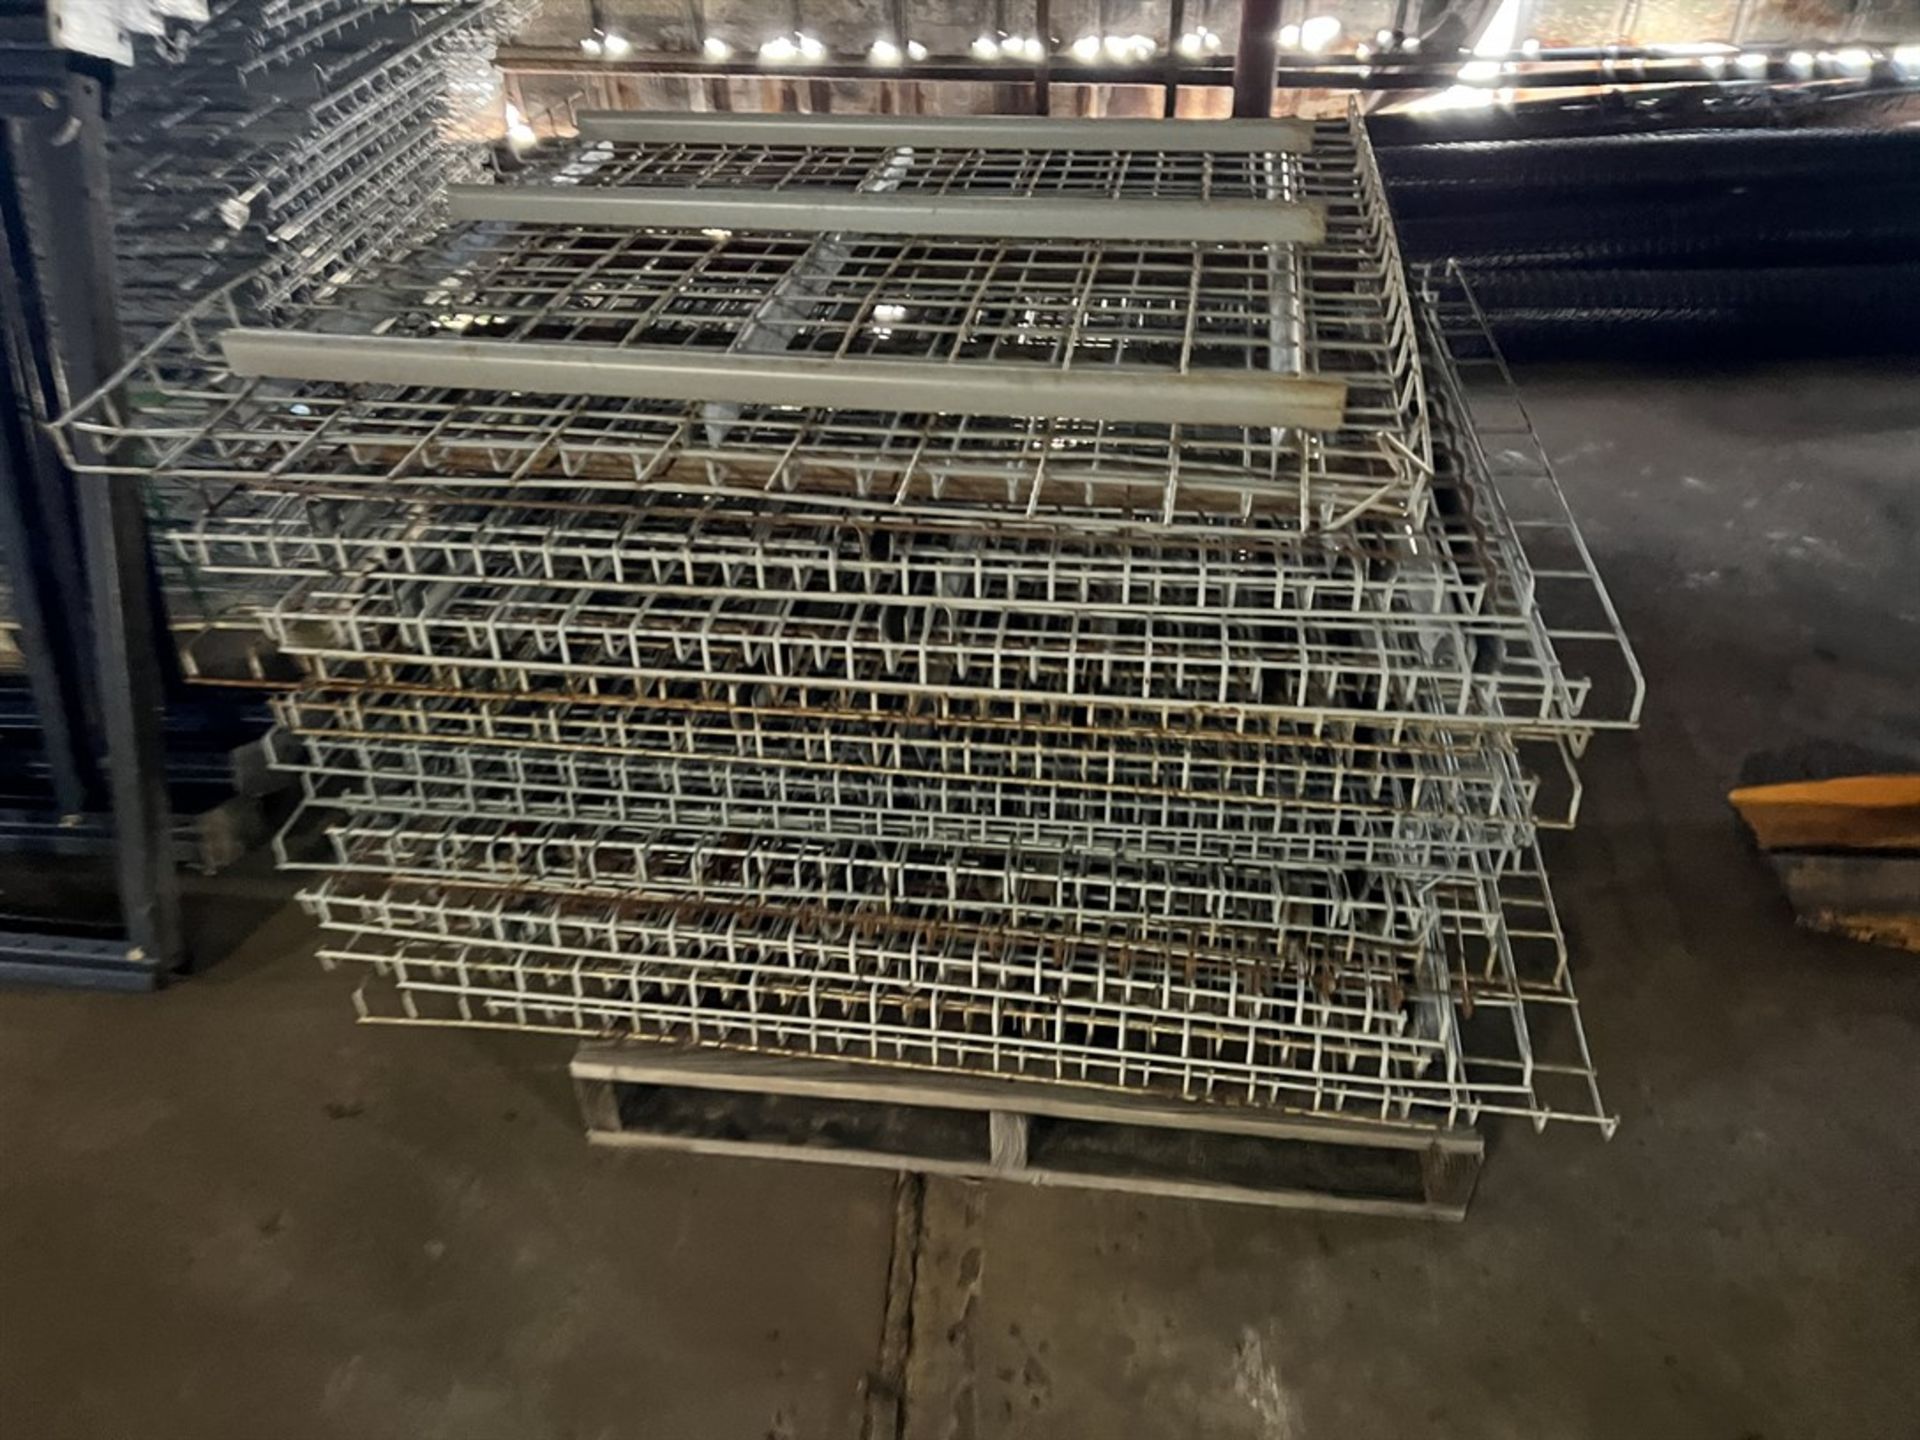 Lot of Pallet Racking Comprising 84"x 48" Uprights and 48"x 42" Wire Decking (Building 39) - Image 2 of 5